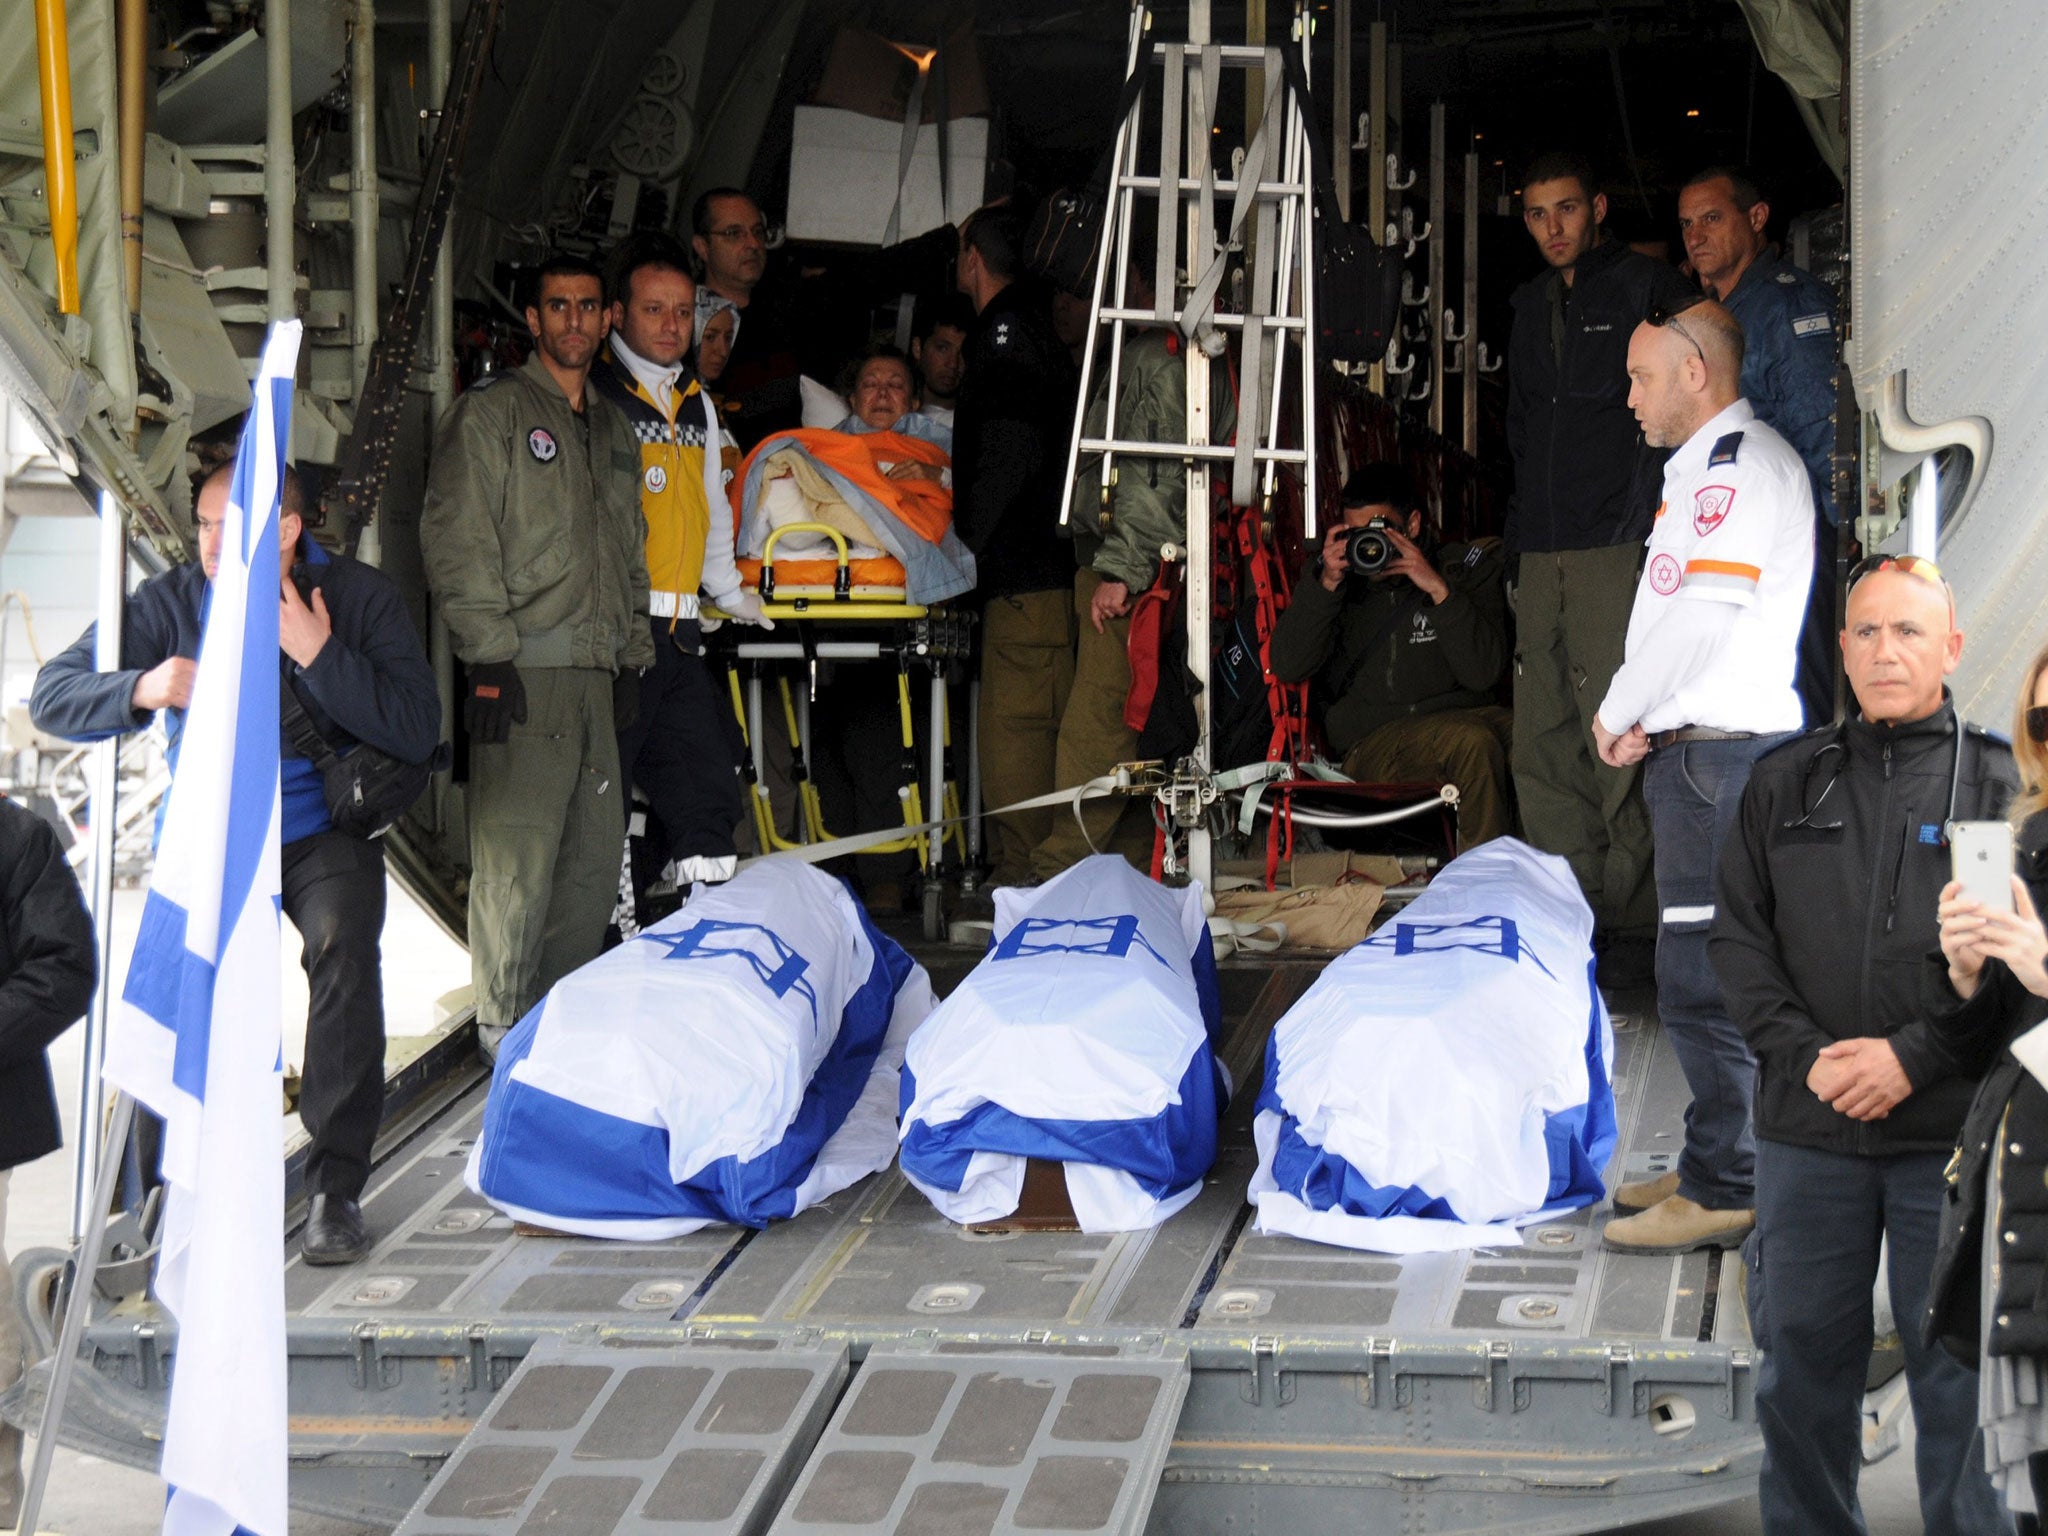 The flag-draped coffins of the victims of Saturday's suicide bombing, are loaded on a military aircraft at Ataturk International airport in Istanbul, Turkey March 20, 2016